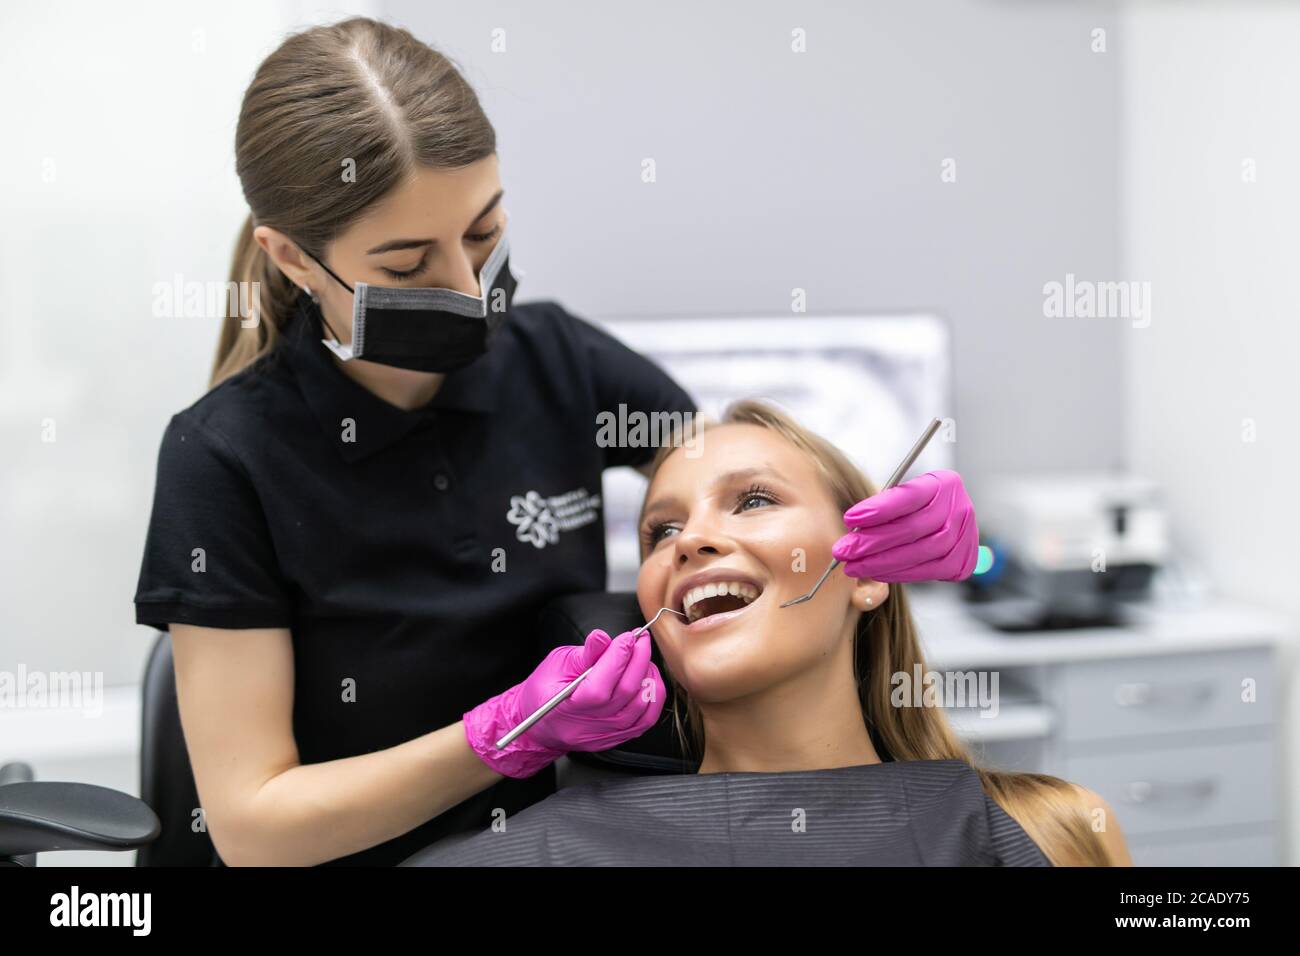 Young woman having dental check-up in dentist's office, smiling, looking at camera. Stock Photo